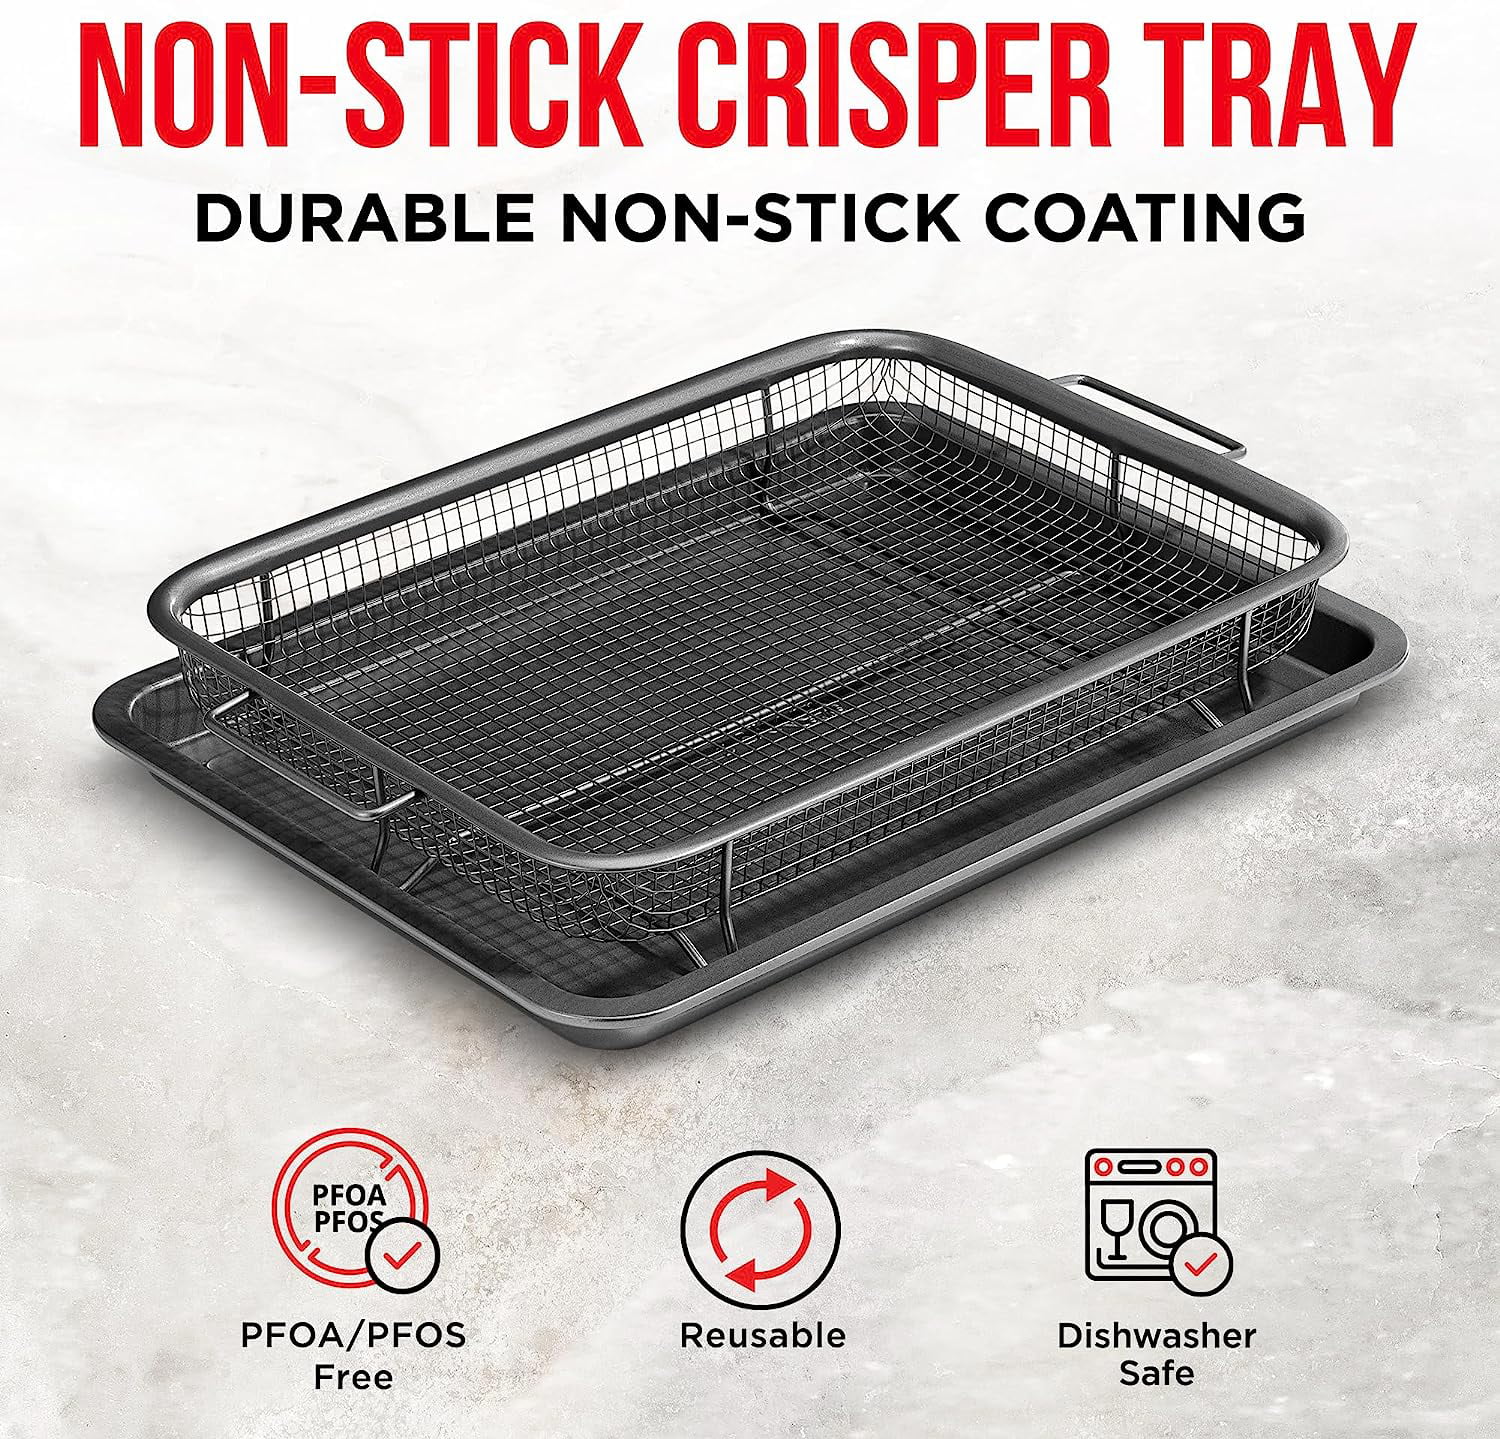 Air Fryer Basket and Tray for Oven, 15.5'' x 12.5'' Stainless Steel Crisper  Tray and Basket for Convection Oven, Baking Pan Perfect for the Grill